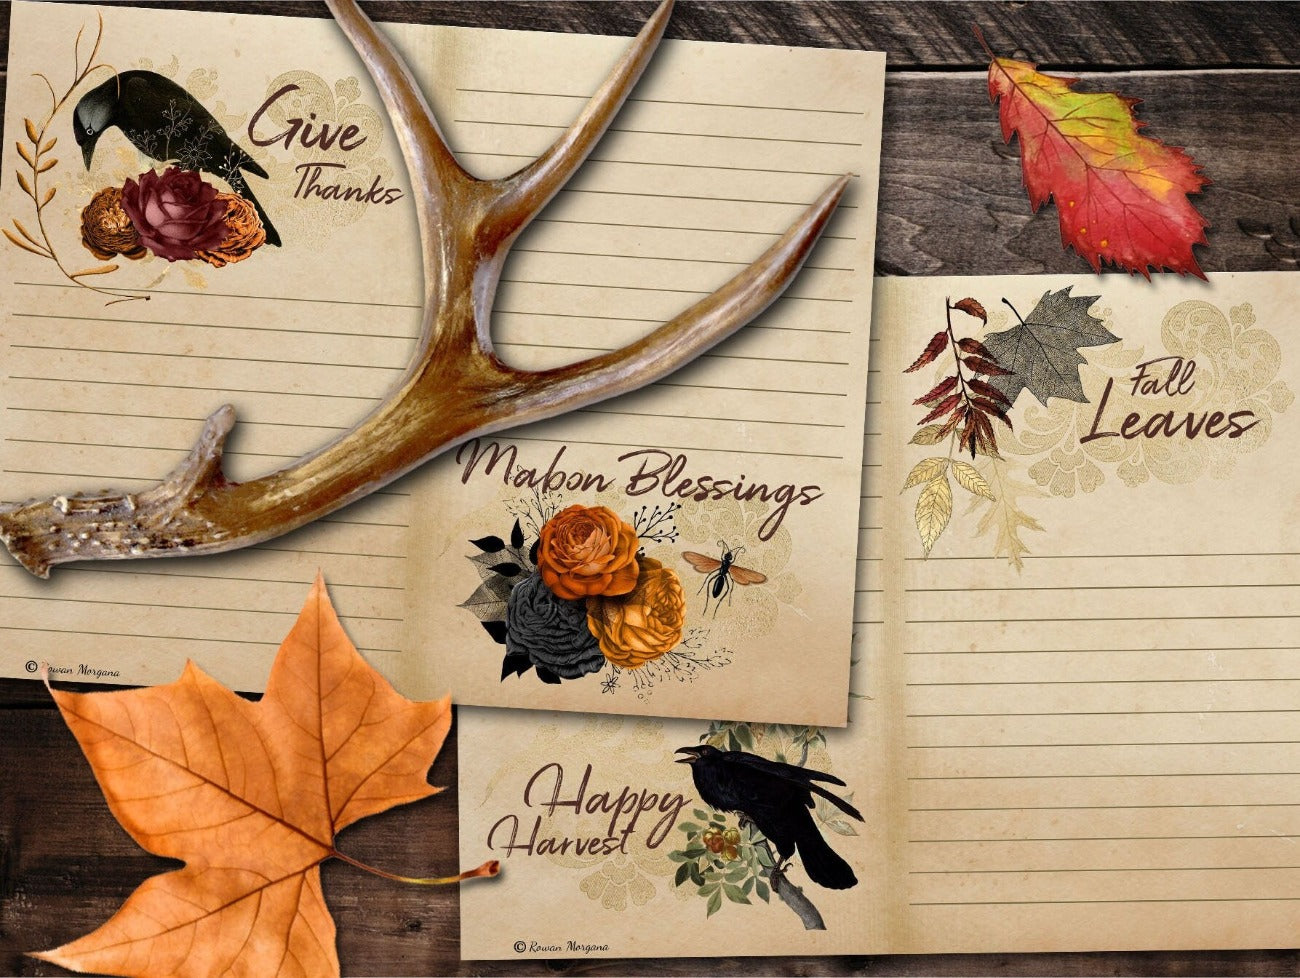 Give Thanks, Mabon Blessings, Happy Harvest and Fall Leaves MABON JUNK JOURNAL Kit Printable Pages - Morgana Magick Spell